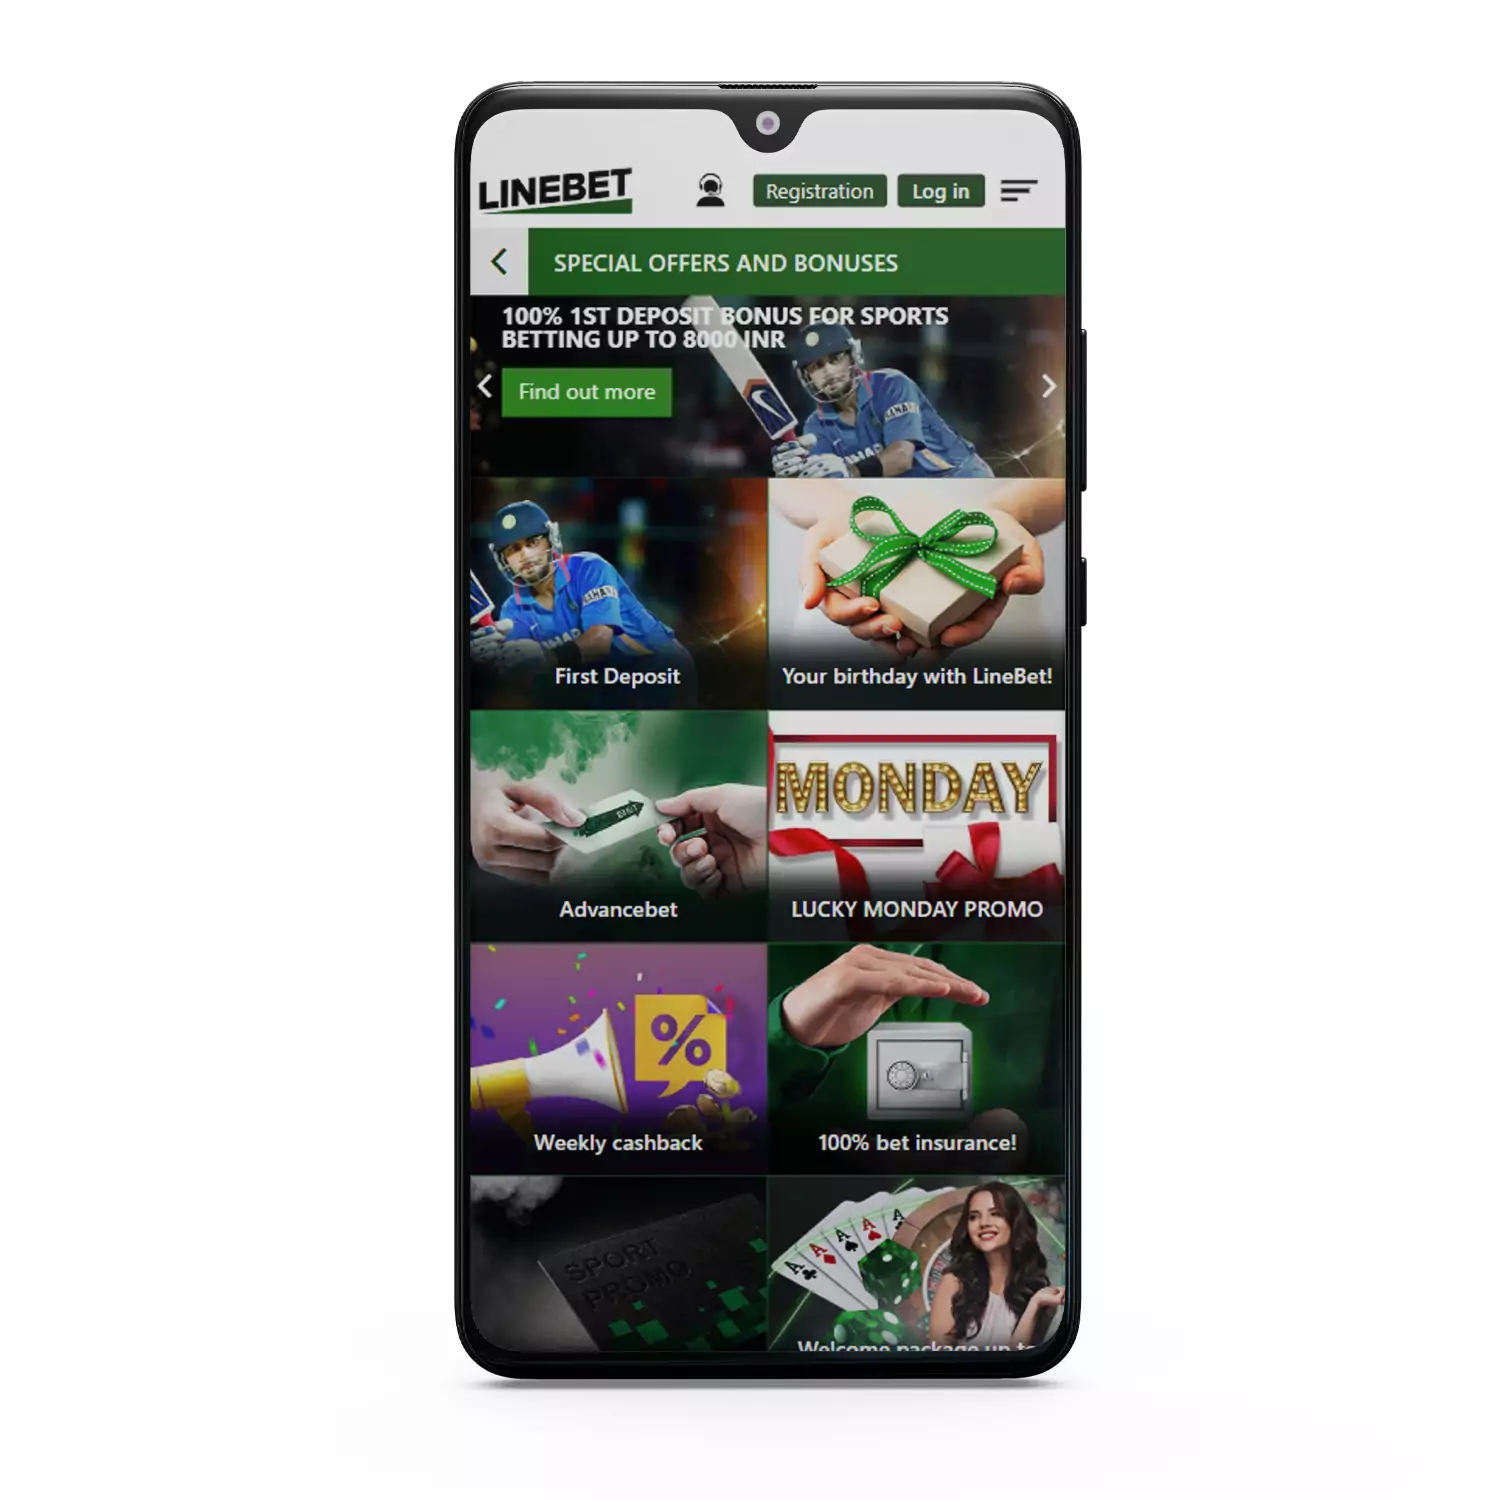 The Linebet application for Android and iOS is created for players from India.